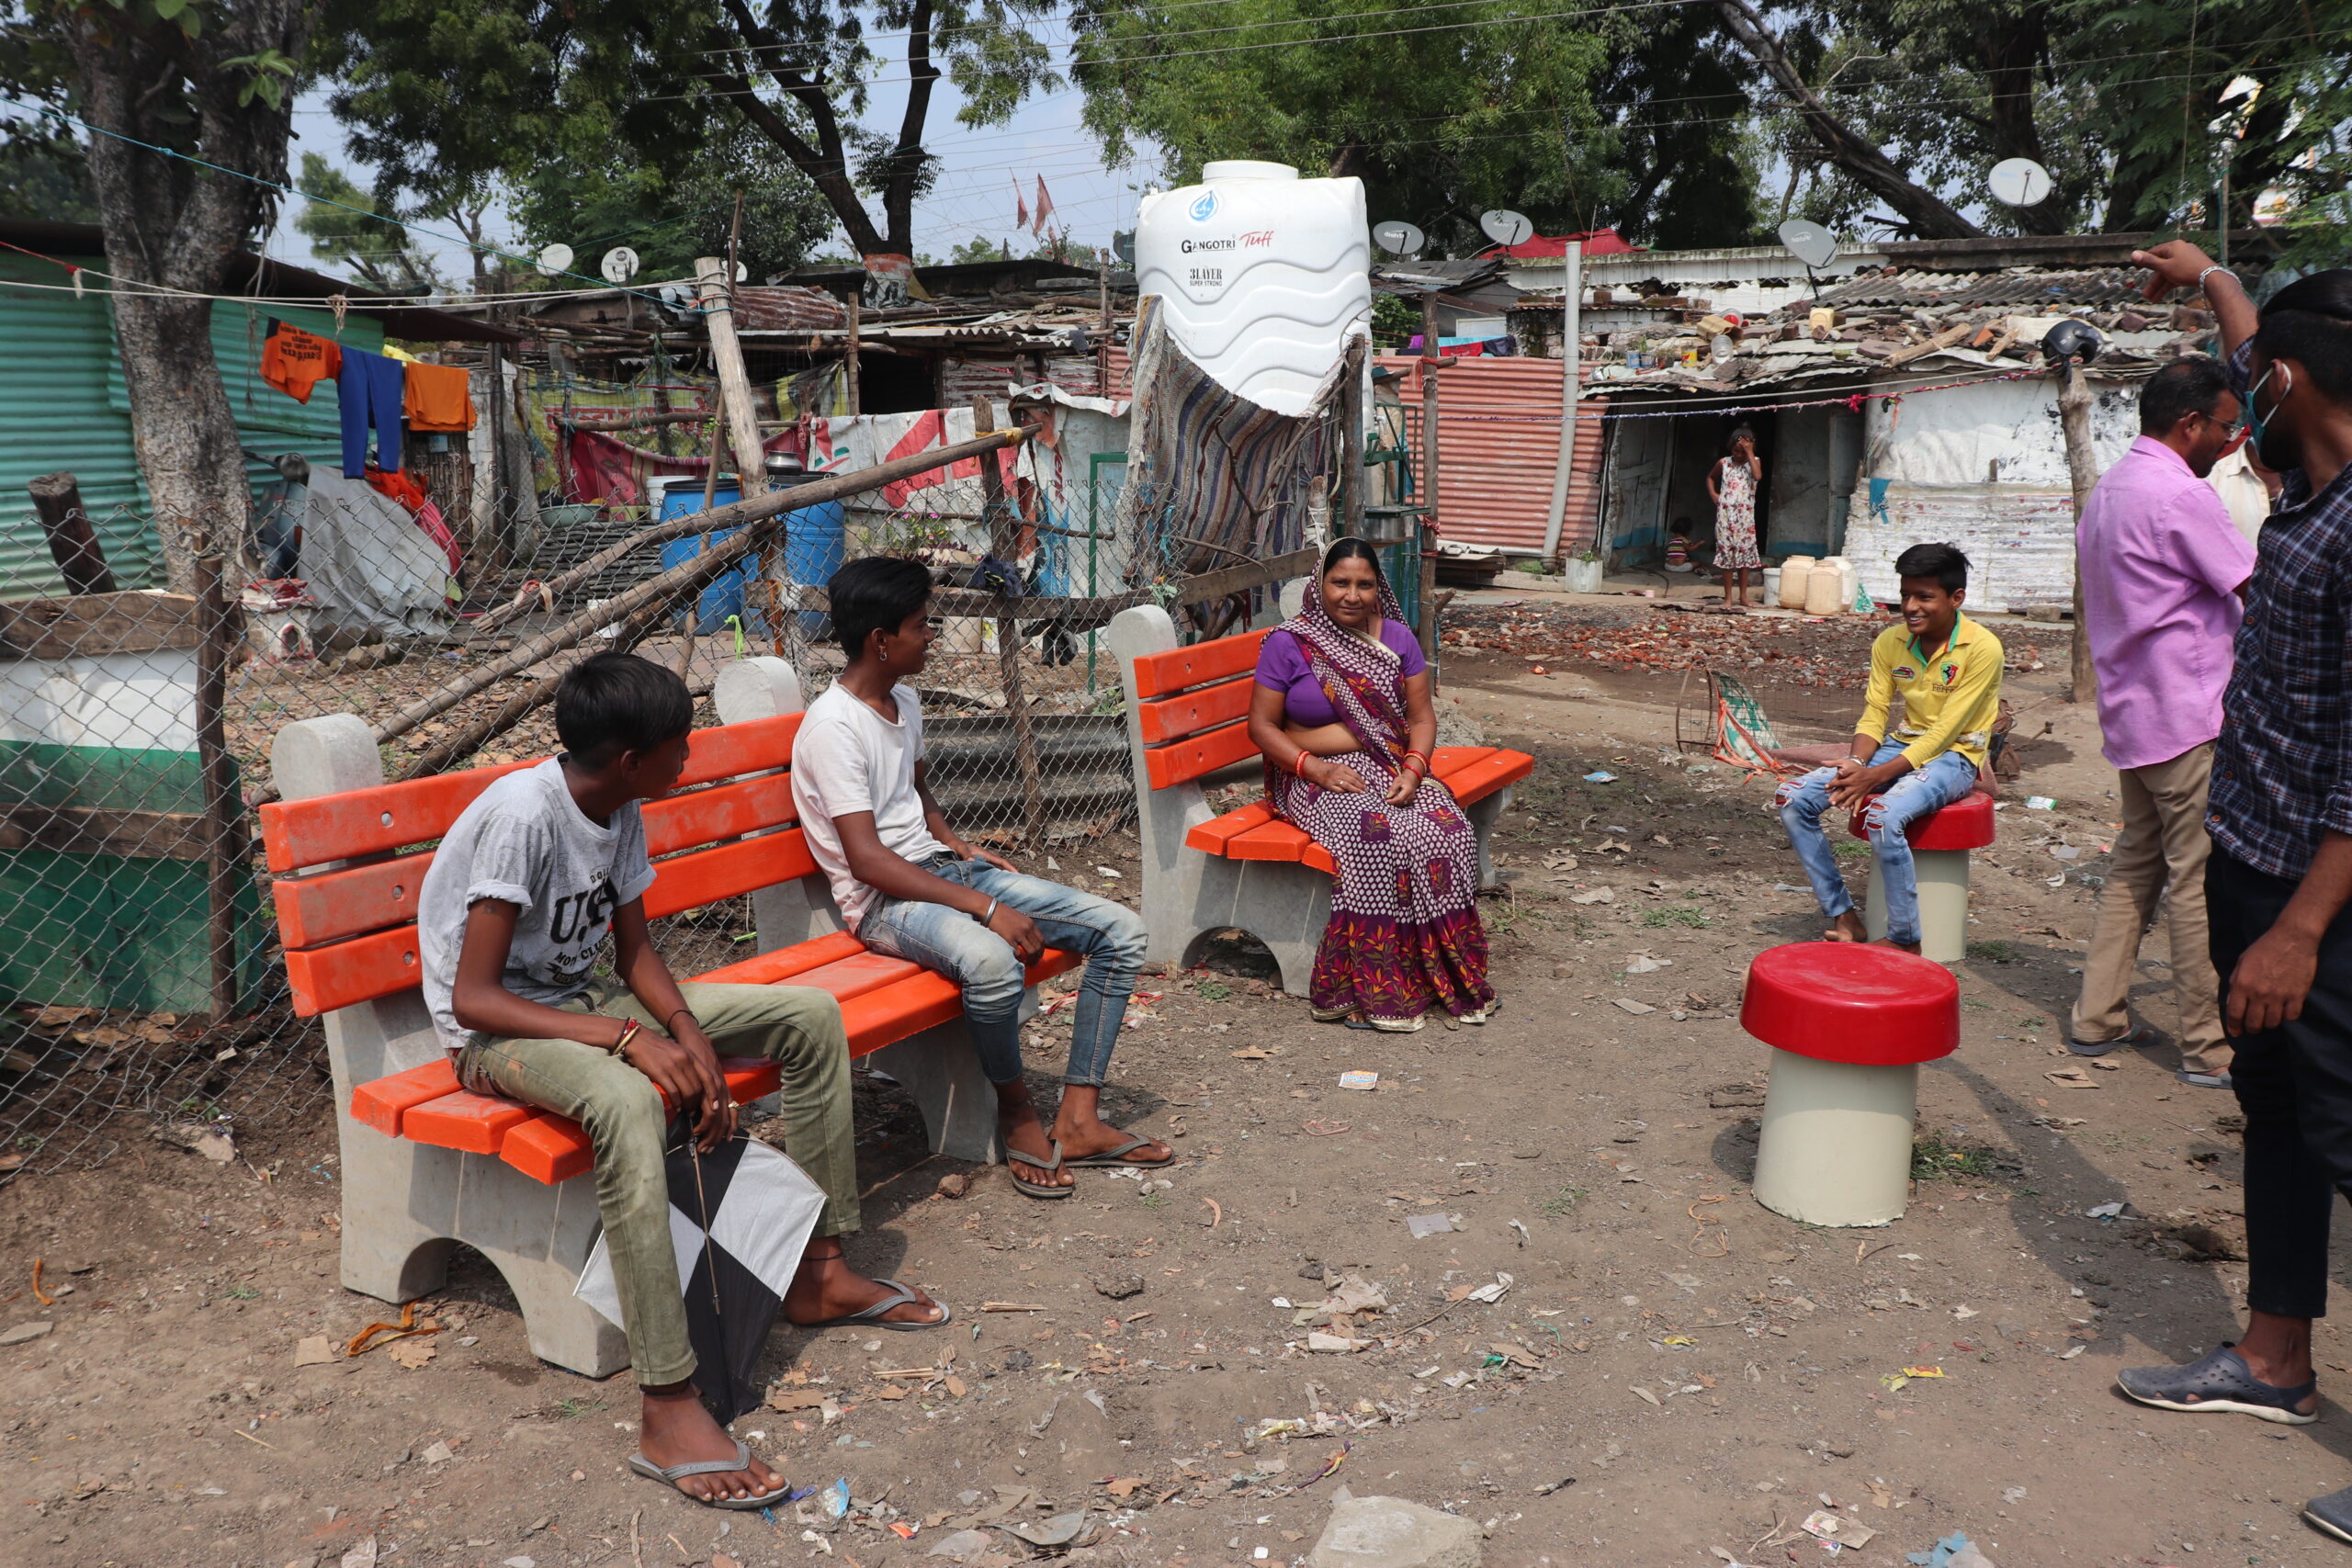 Few boys and a lady are seated on an arrangement of benches and stools in the public area of a rural settlement. They are following the norms of social-distancing set during the COVID-19 pandemic.